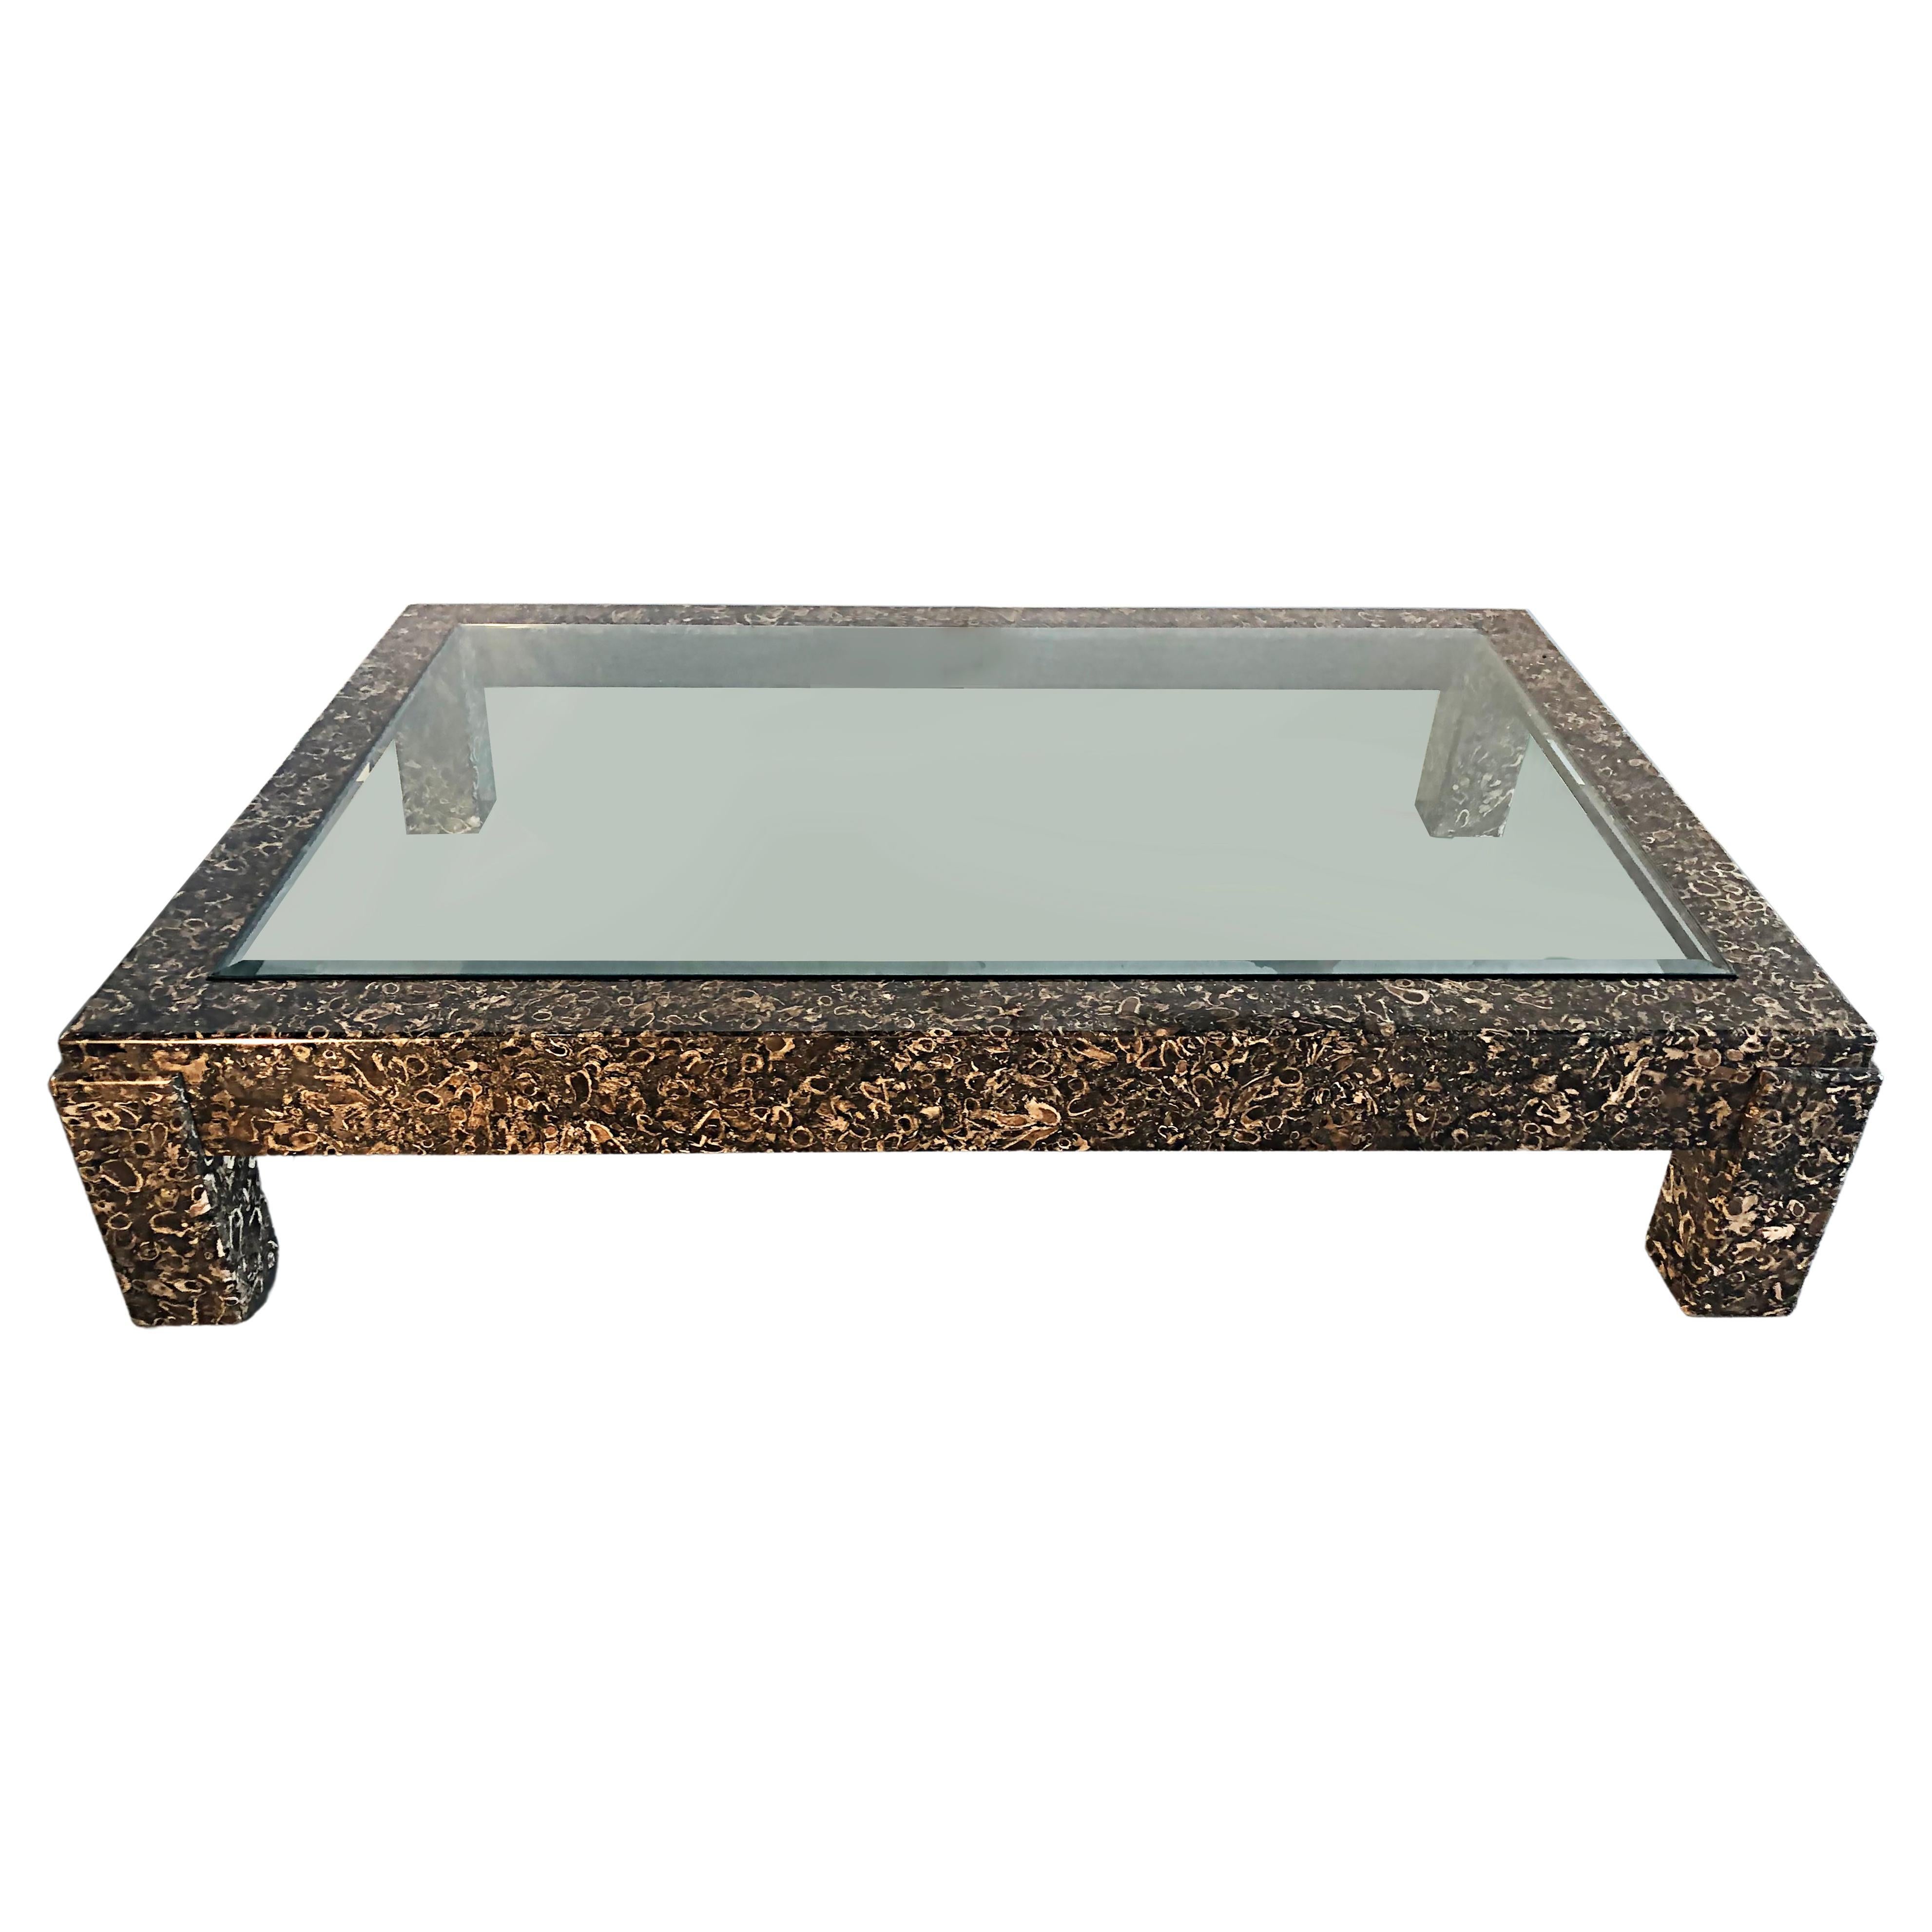 Overscale Marble Coffee Table with Inset Glass Top